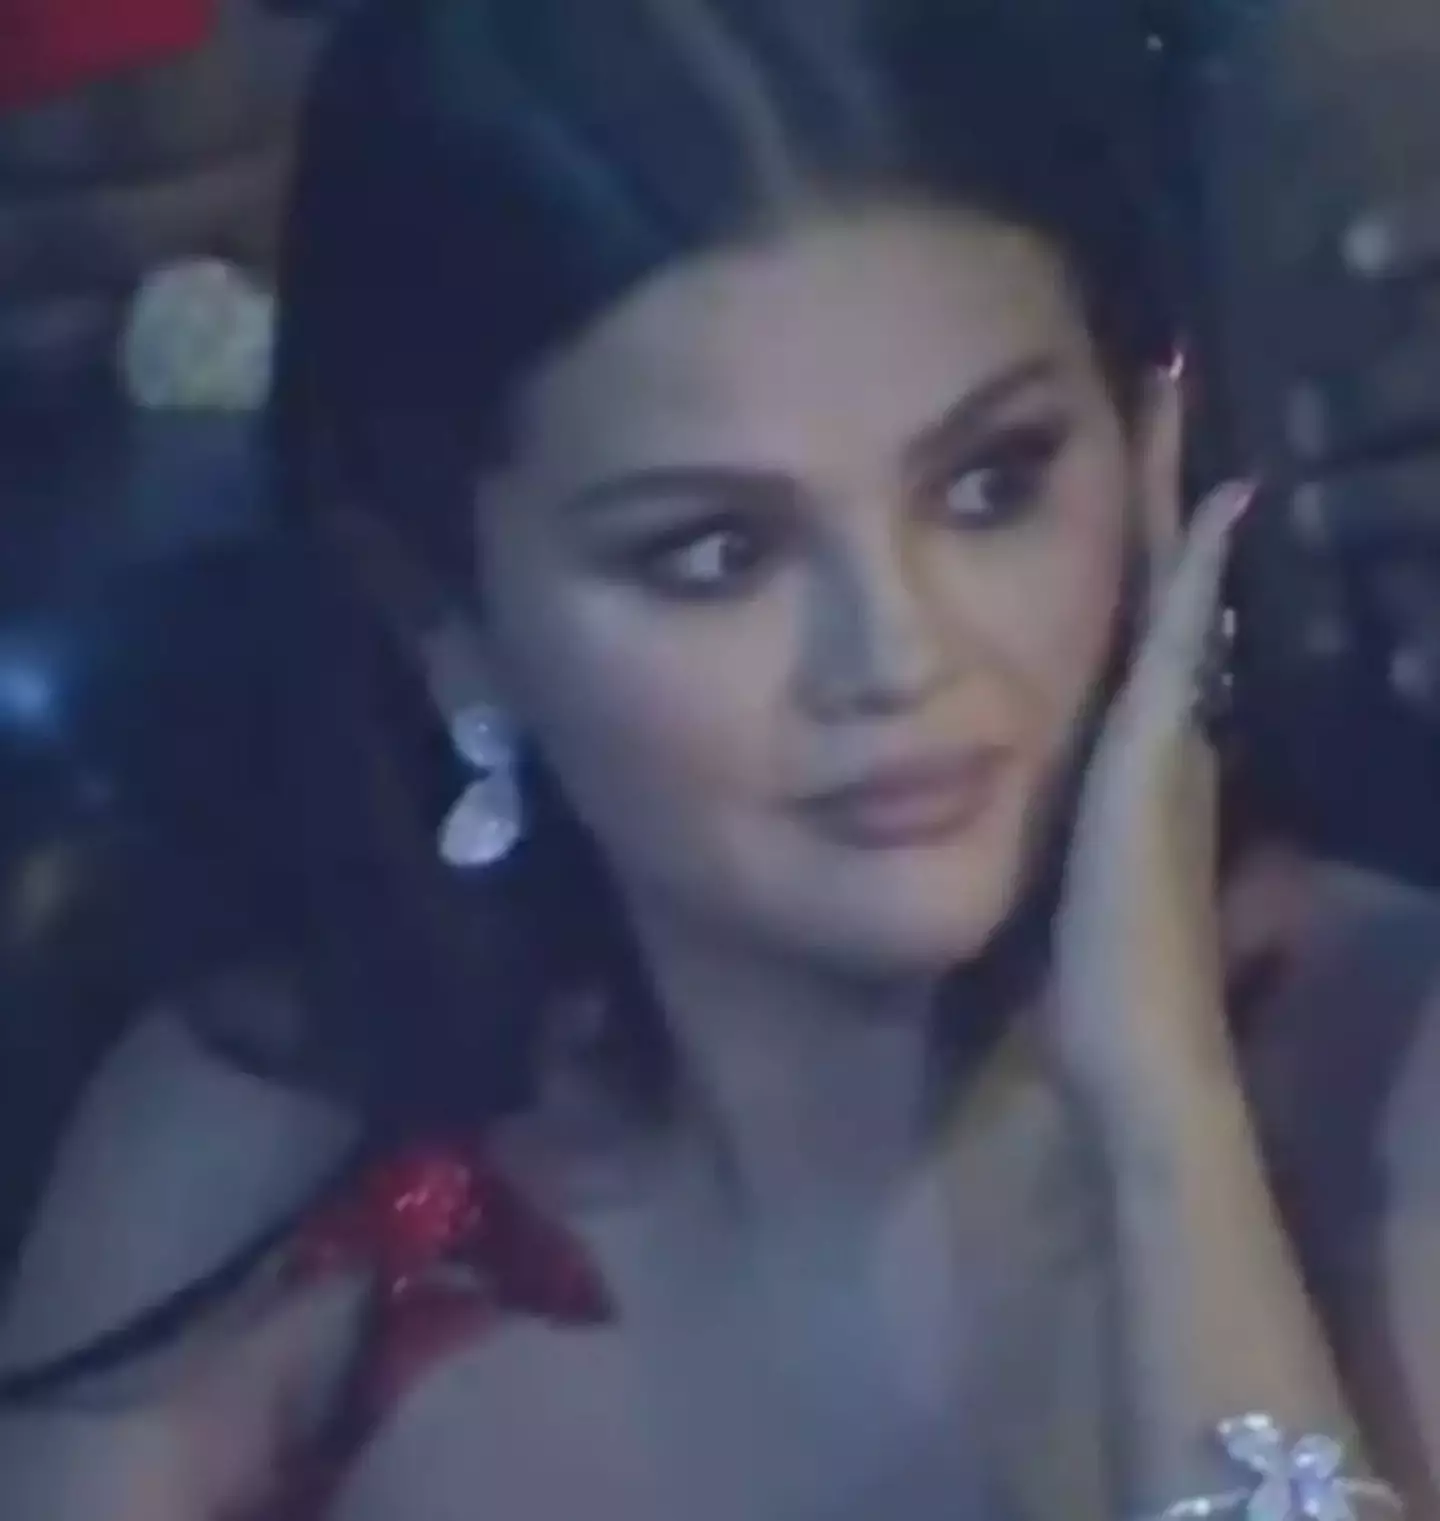 Selena Gomez's reaction to the performance has gone viral on social media.